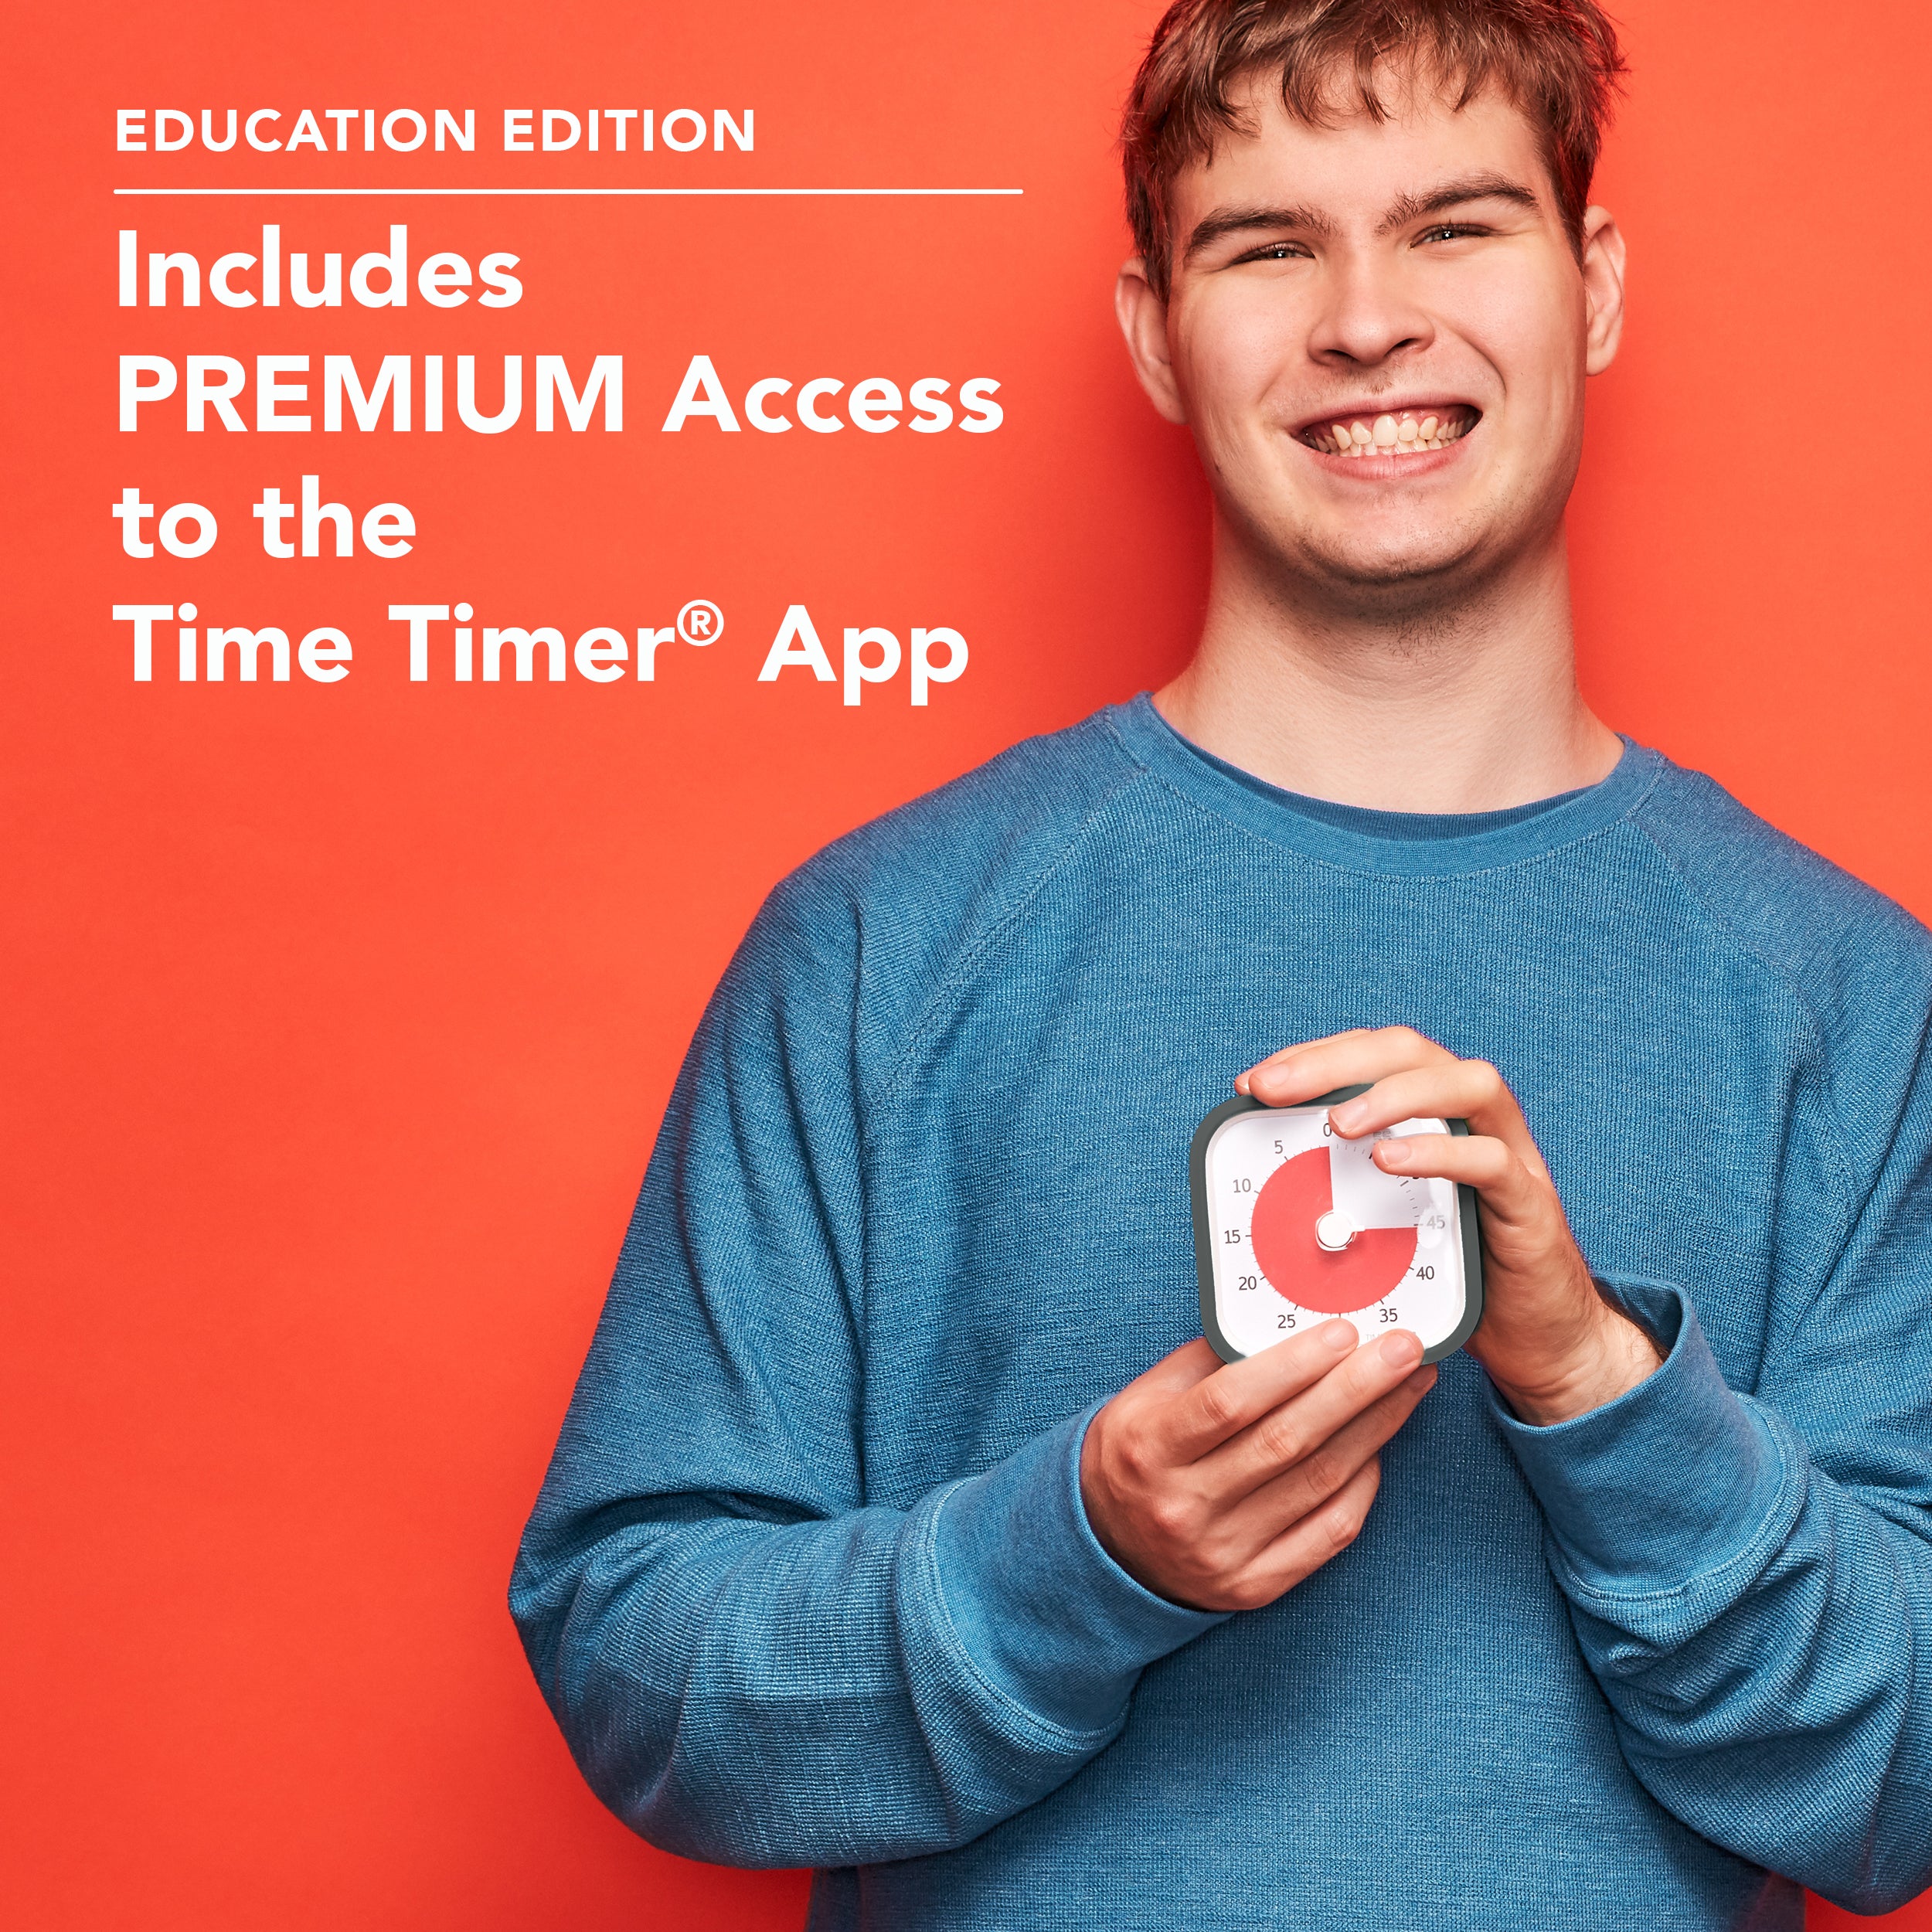 Bayley, a young man with autism, is holding the Time Timer MOD 60 Minute Visual Timer. There is text on the image that reads "Education Edition: Includes Premium Access to the Time Timer App."